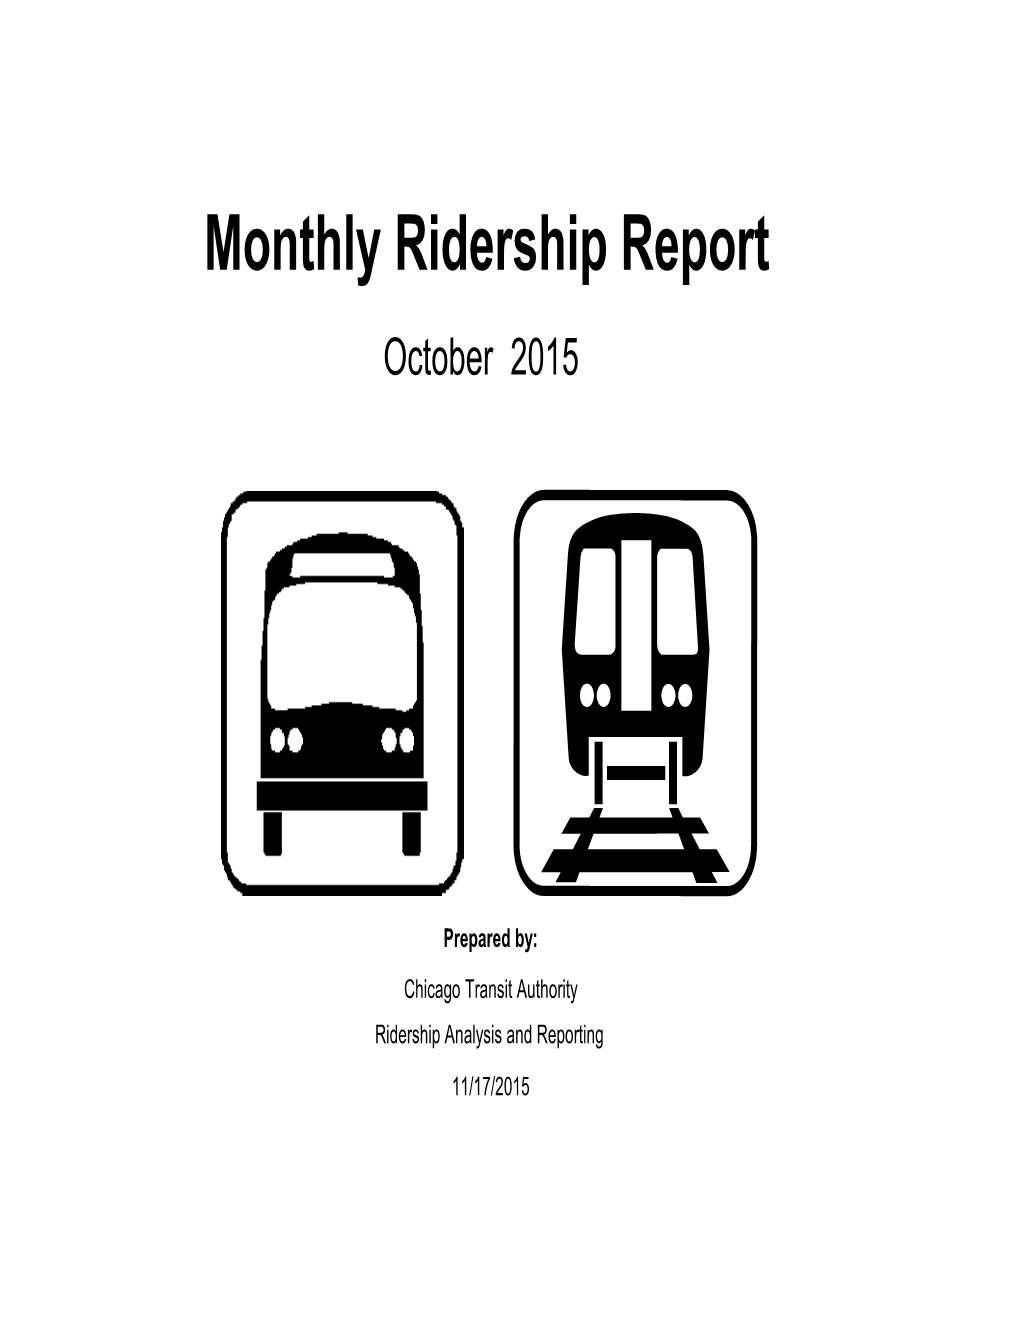 Monthly Ridership Report October 2015